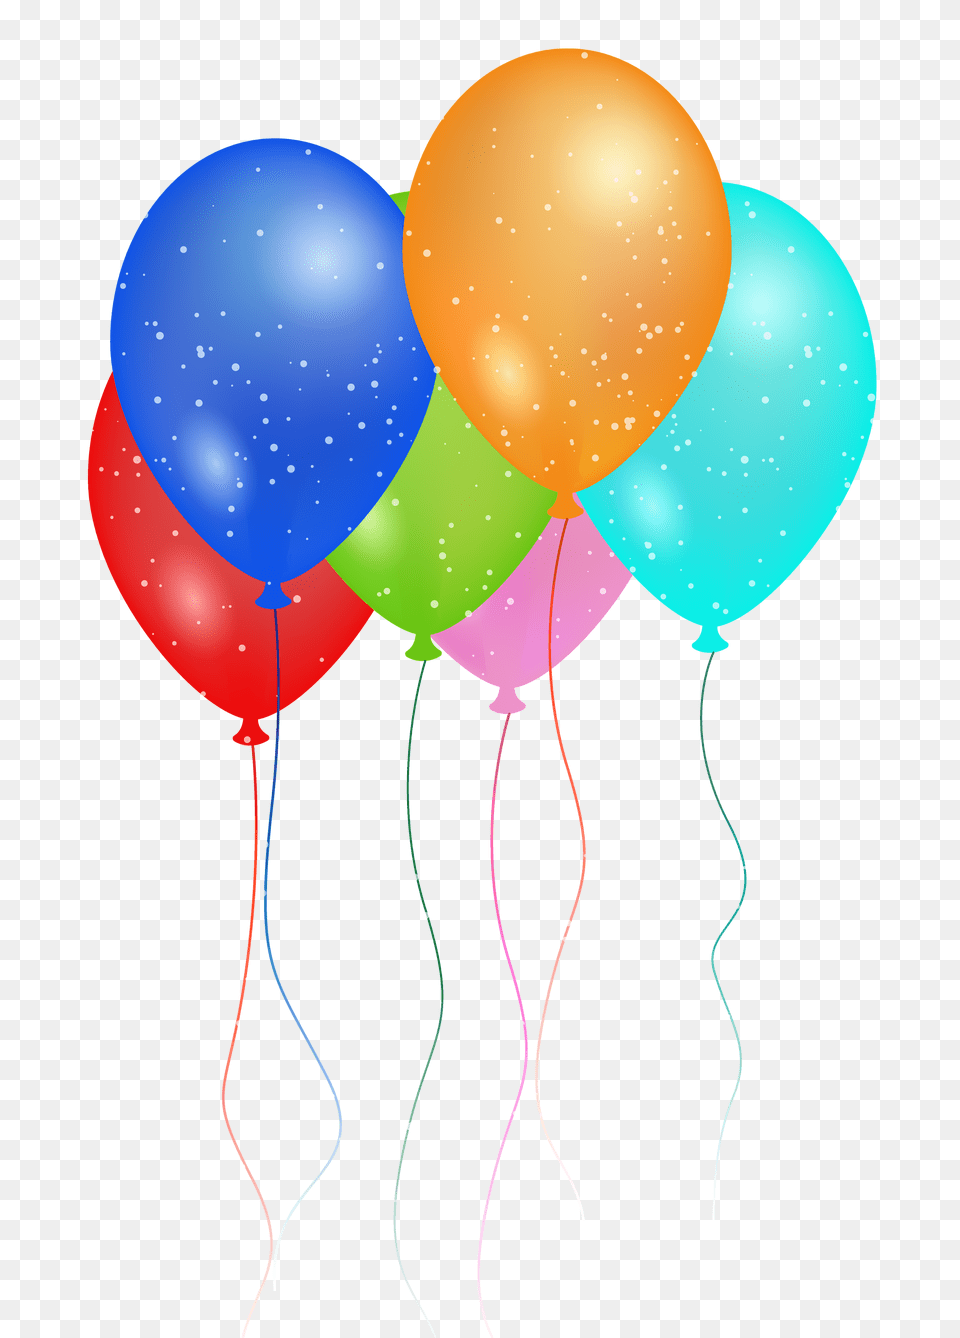 Birthday Party Balloon Transparent Background Birthday Balloons Png Image